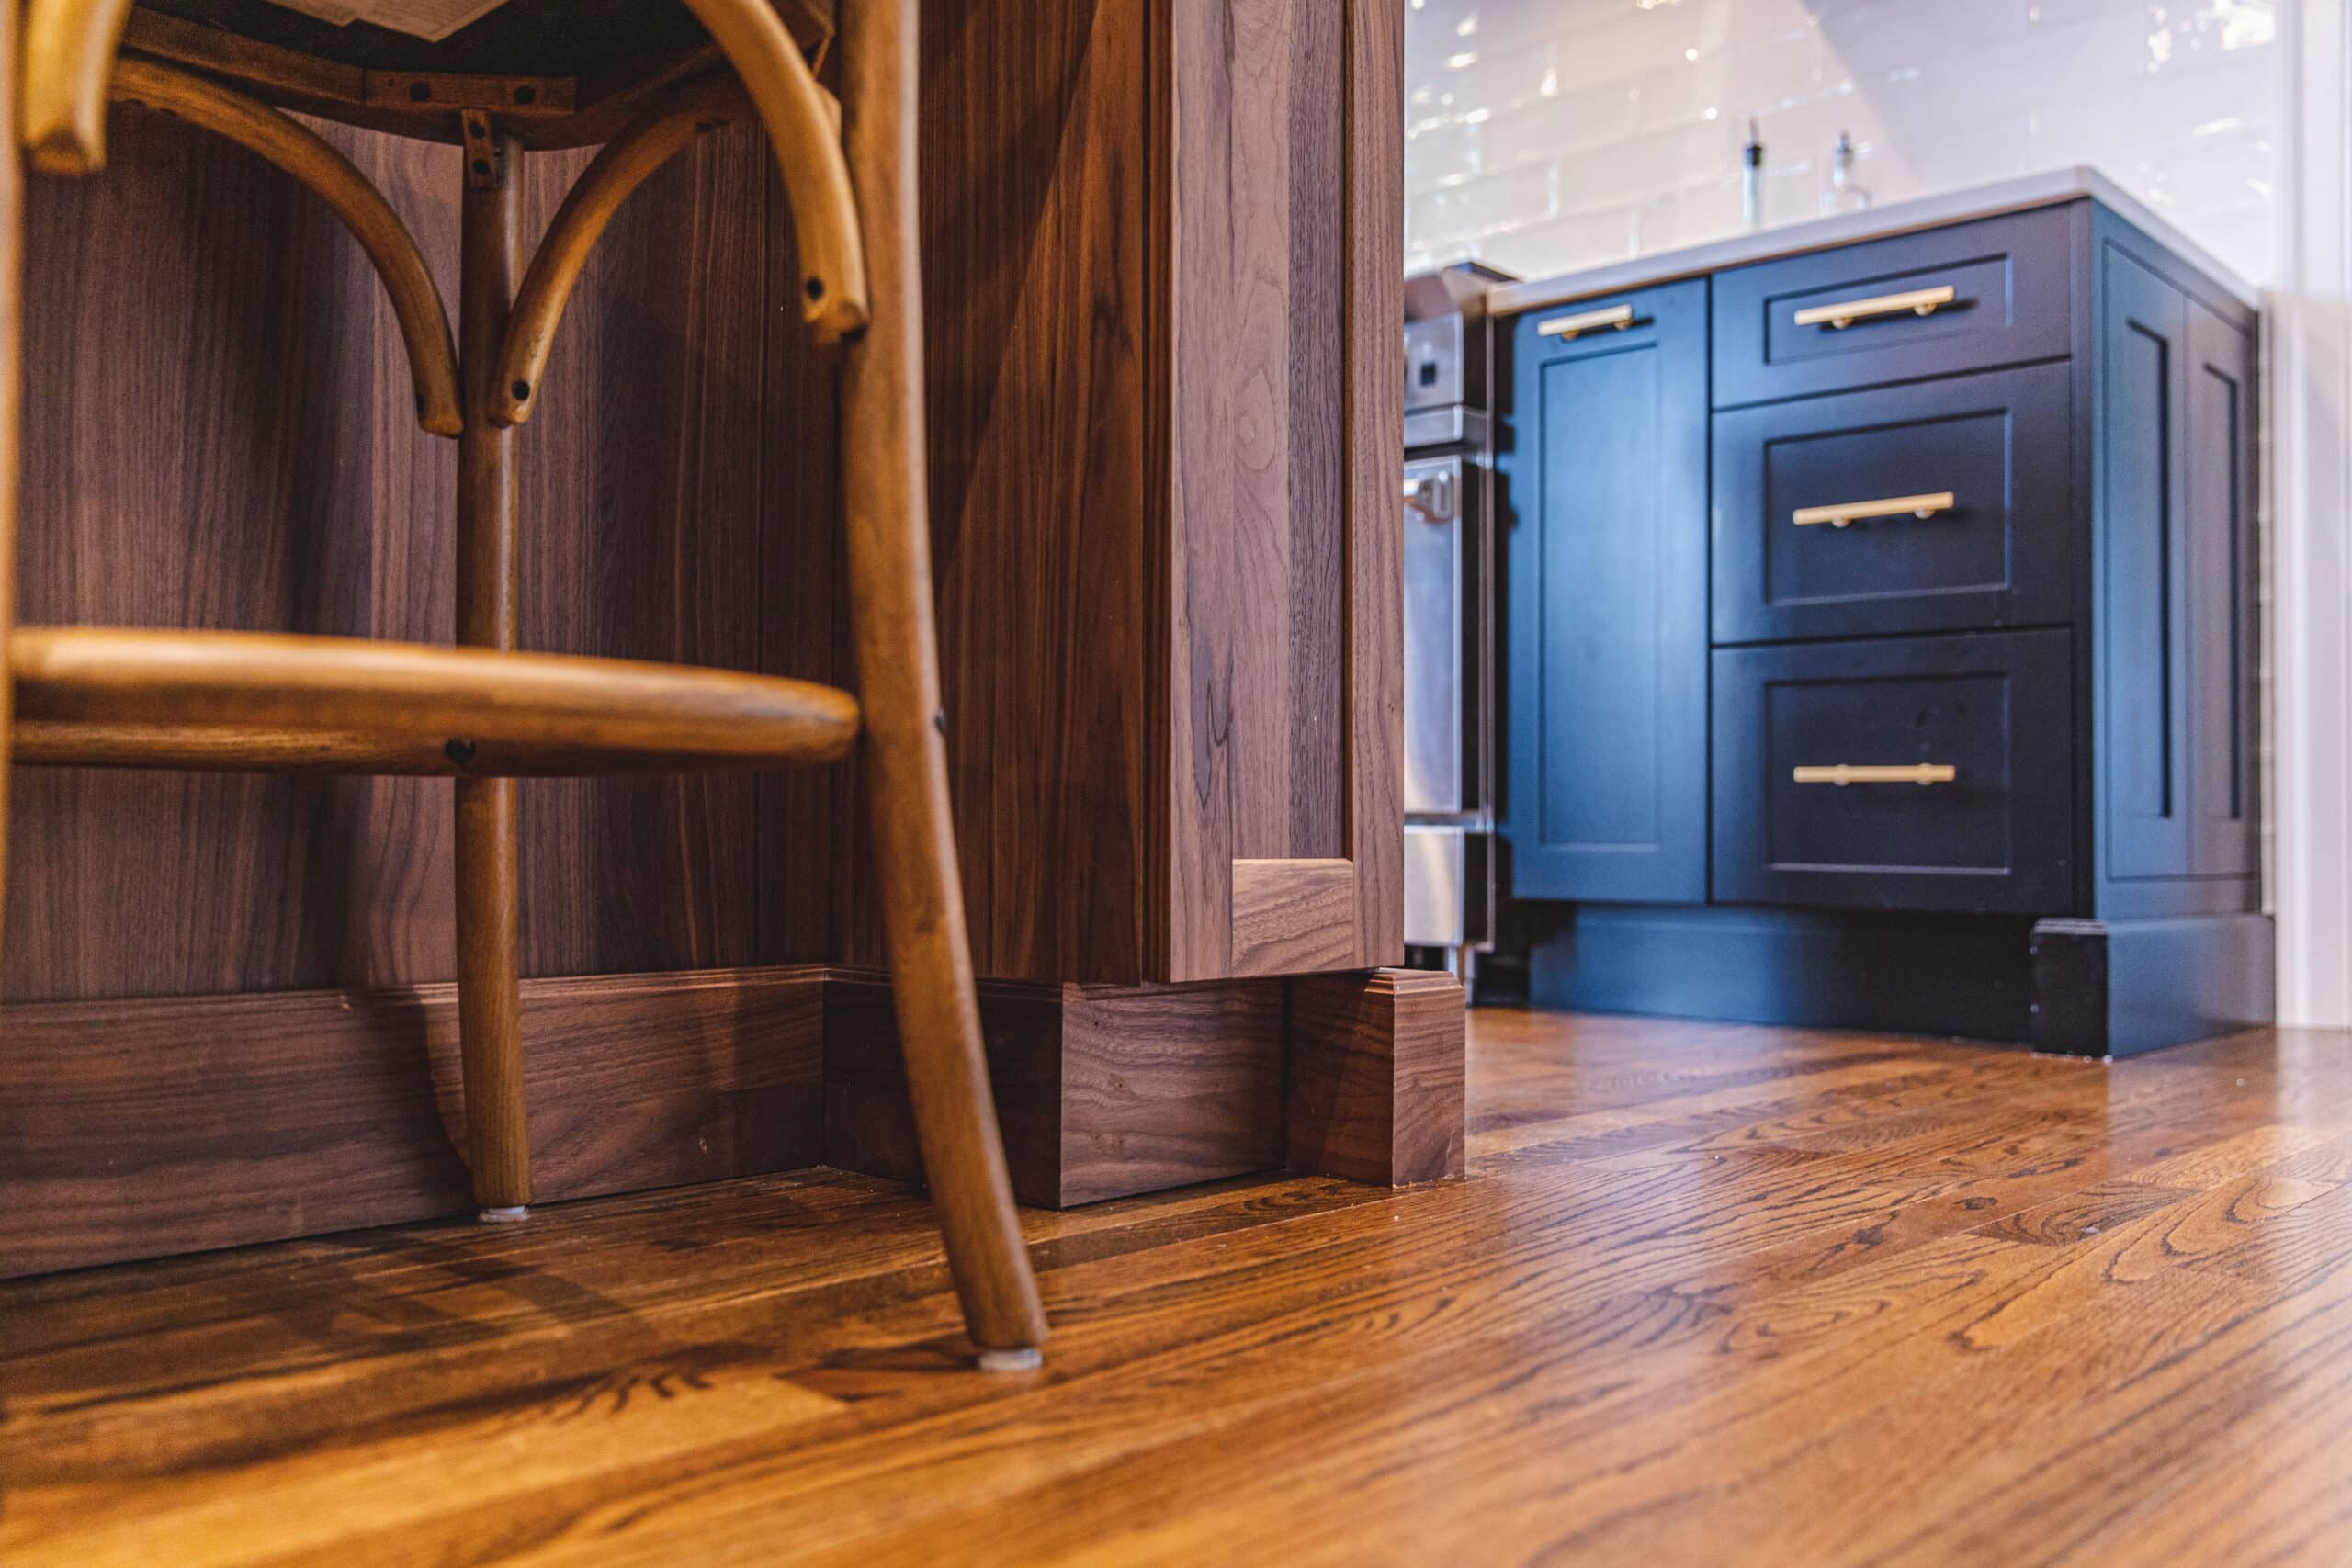 A kitchen with a wooden floor and a bar stool.